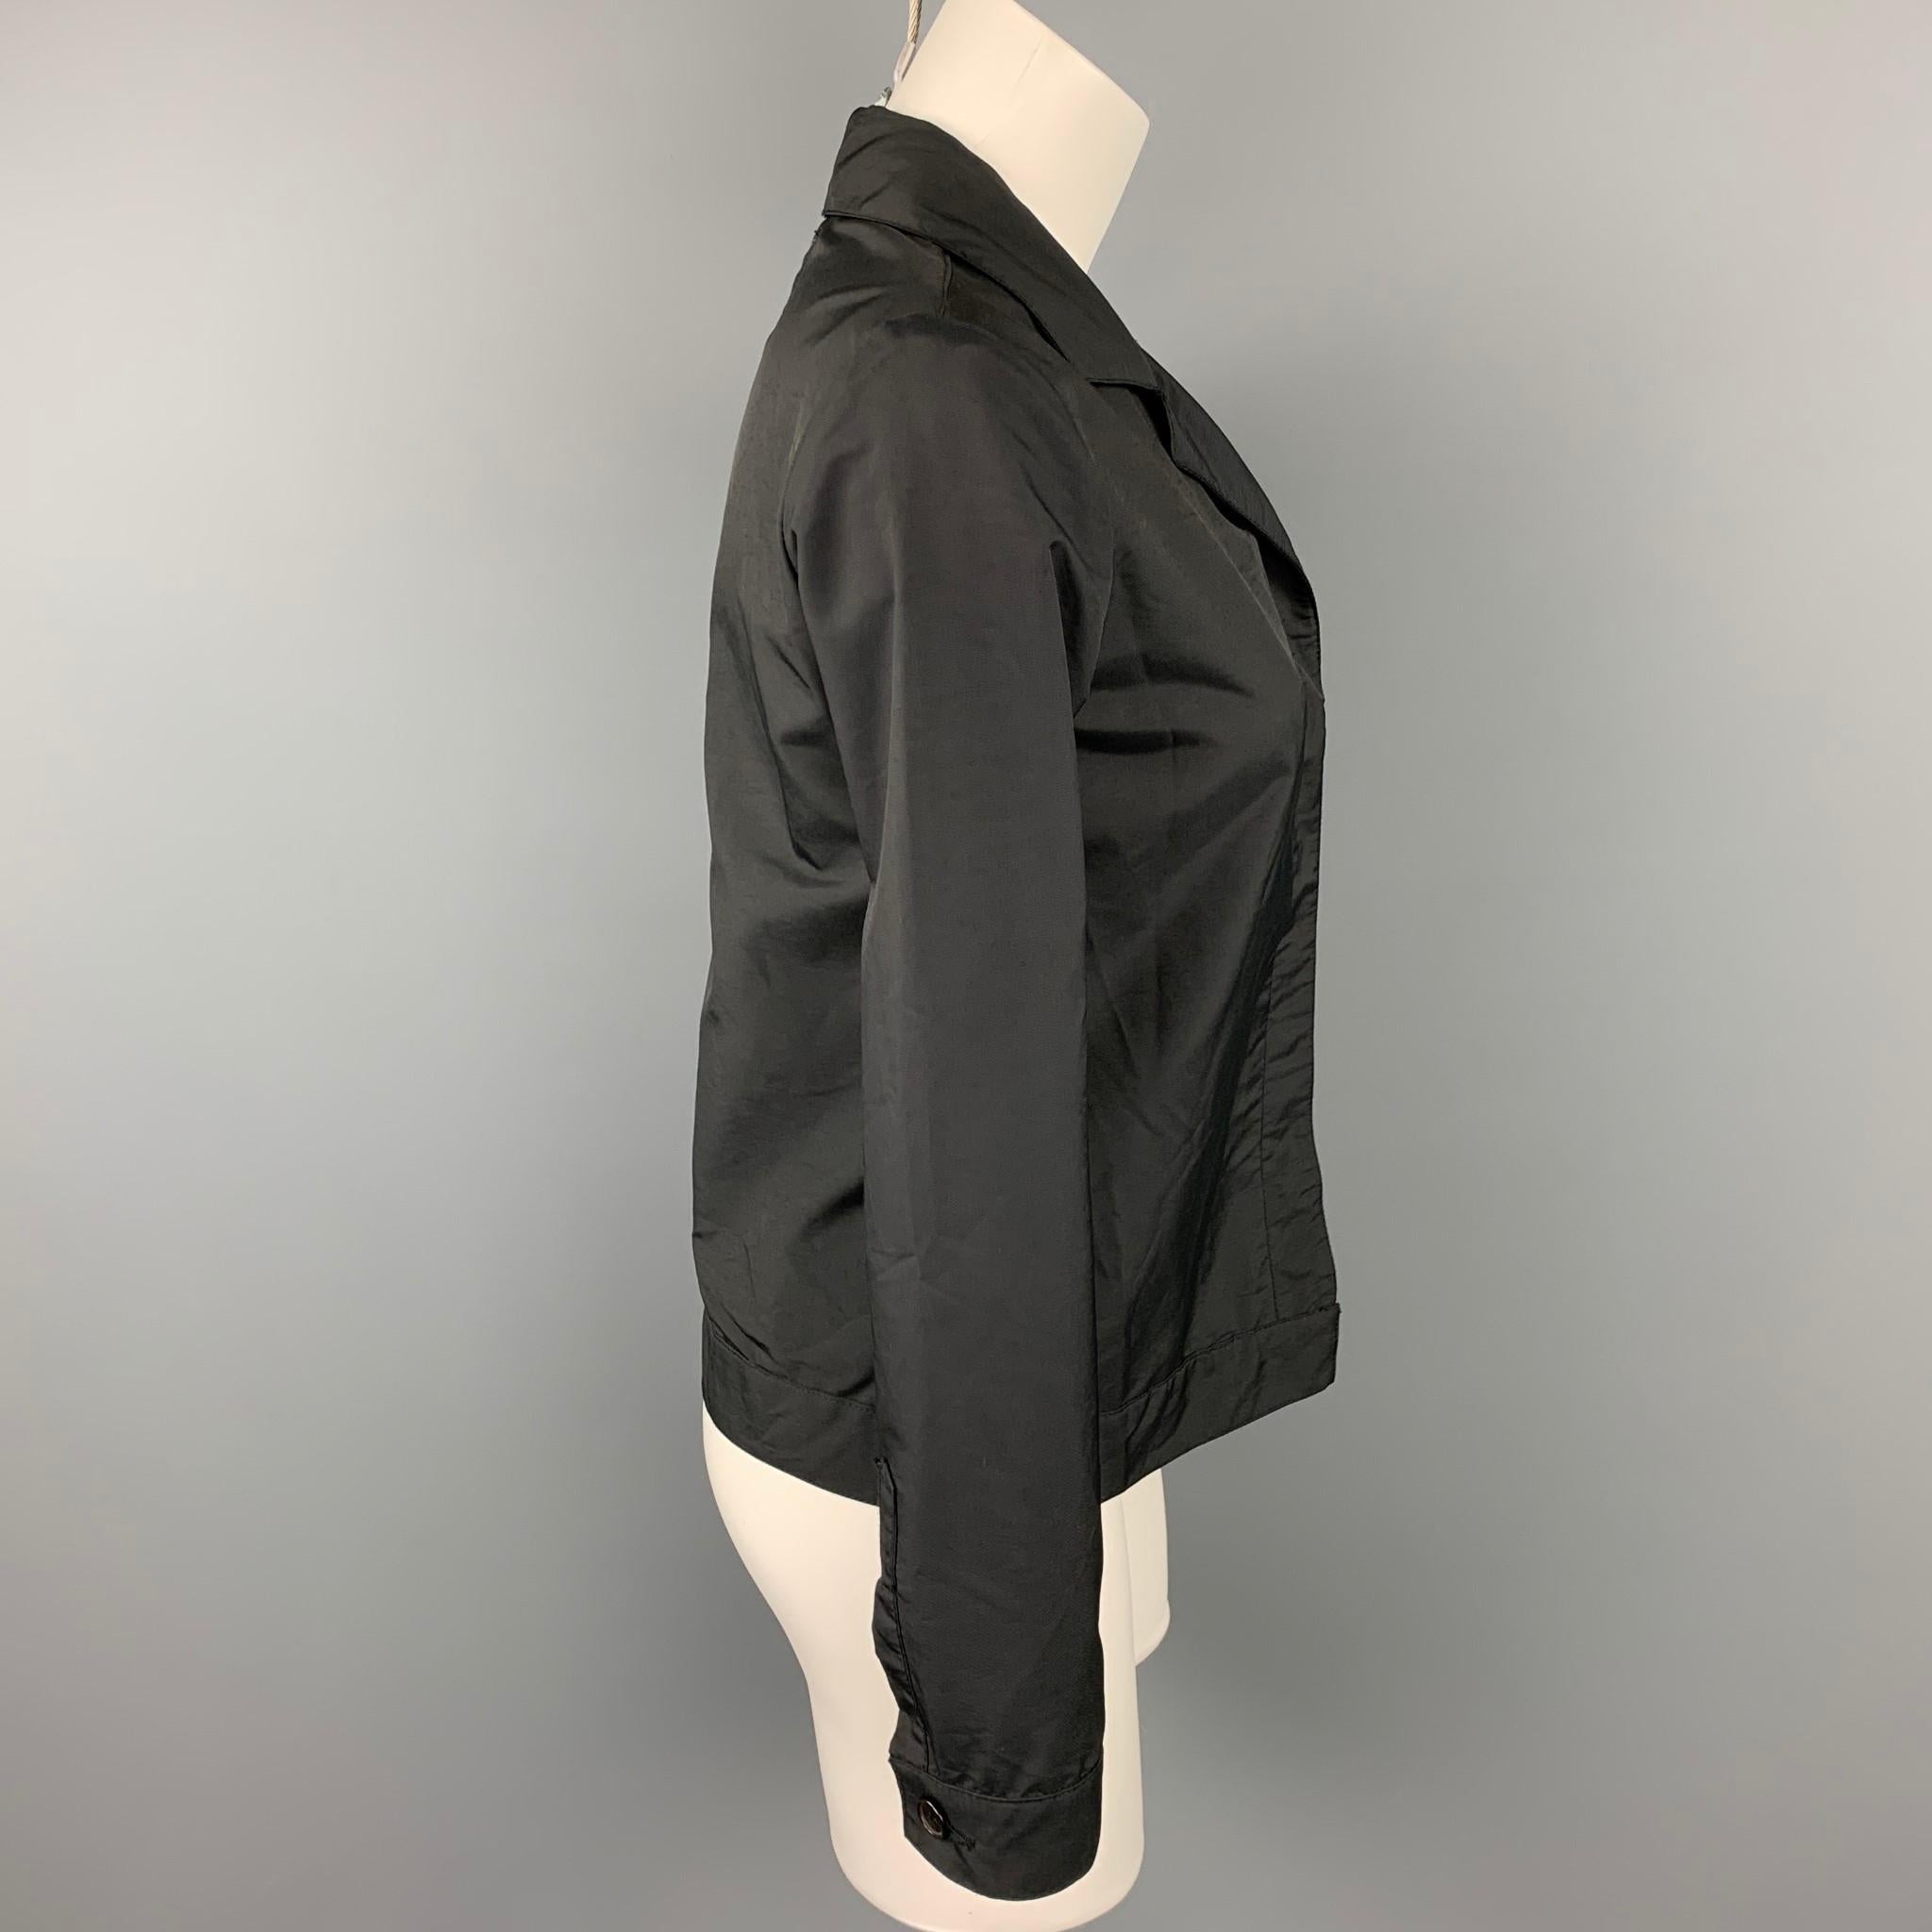 HELMUT LANG jacket comes in a black polyester featuring a notch lapel, front pocket, and a hidden button closure. Made in Italy.

Very Good Pre-Owned Condition.
Marked: 40

Measurements:

Shoulder: 15 in.
Bust: 36 in.
Sleeve: 24 in.
Length: 21.5 in.